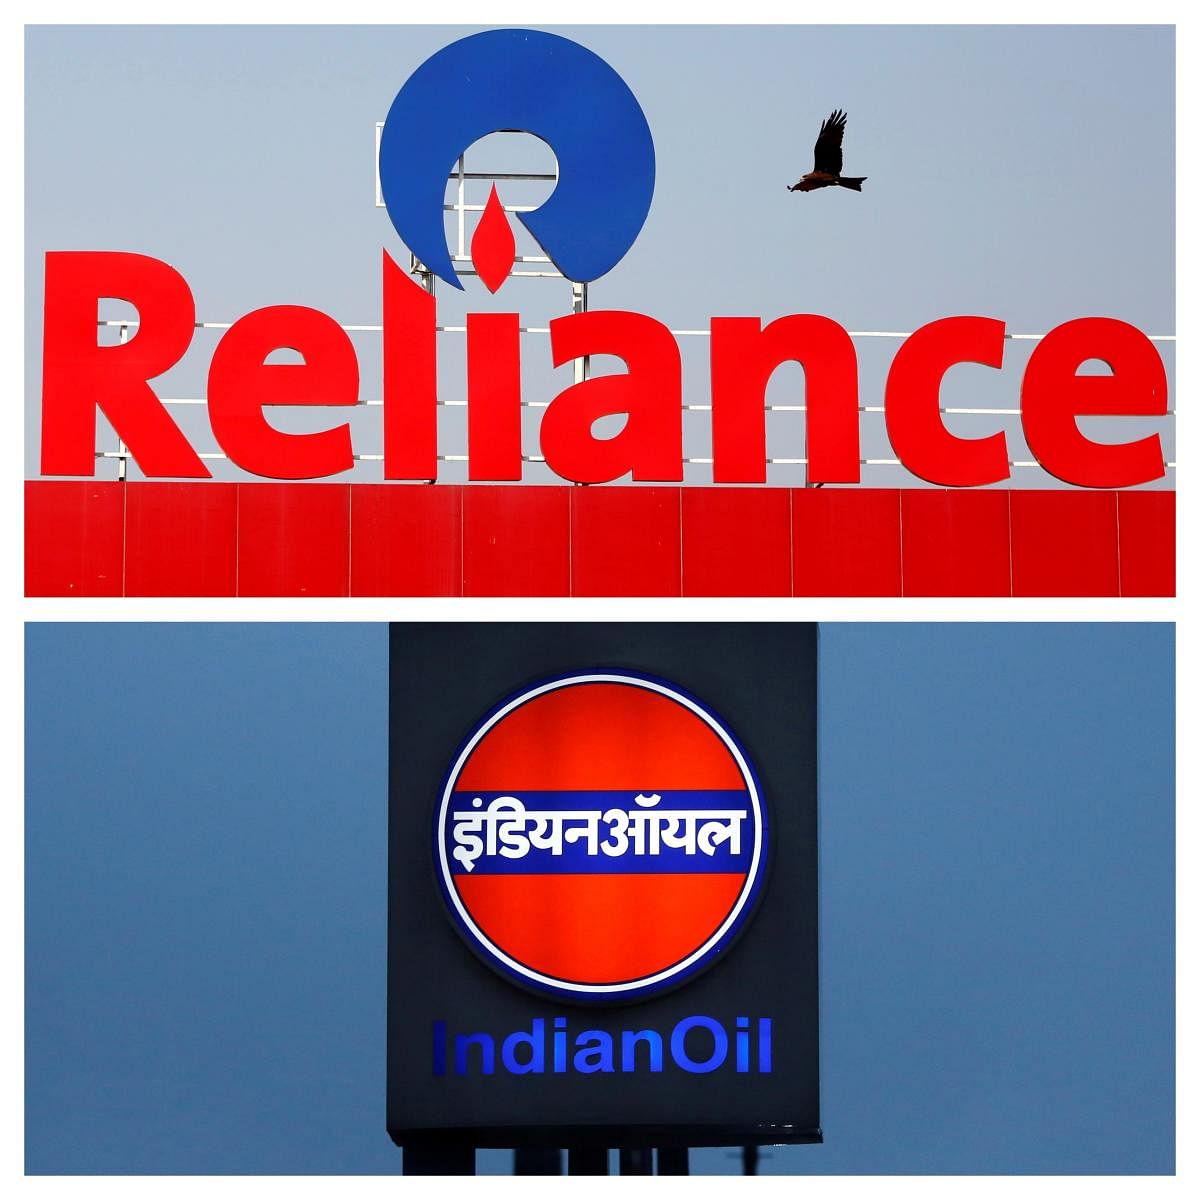 Boosted by its consumer-facing businesses like organised retail and telecom, Reliance Industries ended state-owned Indian Oil Corporation's (IOC) 10-year reign as India's largest company, topping the Fortune India 500 list. Photo/REUTERS